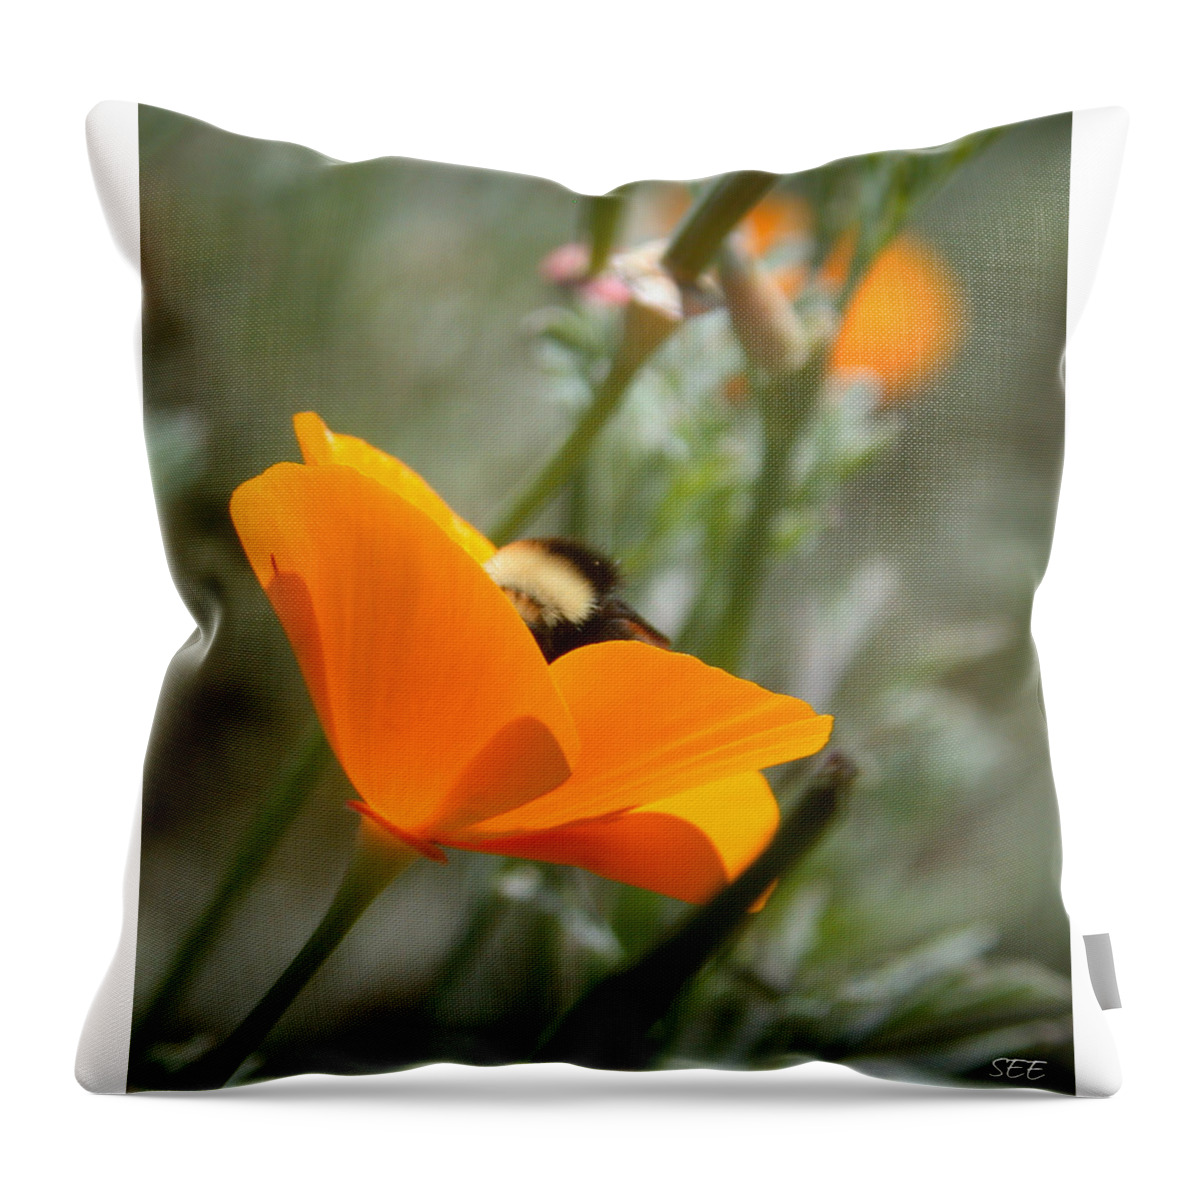 Flowers Throw Pillow featuring the photograph Busy Bumblebee by Susan Eileen Evans